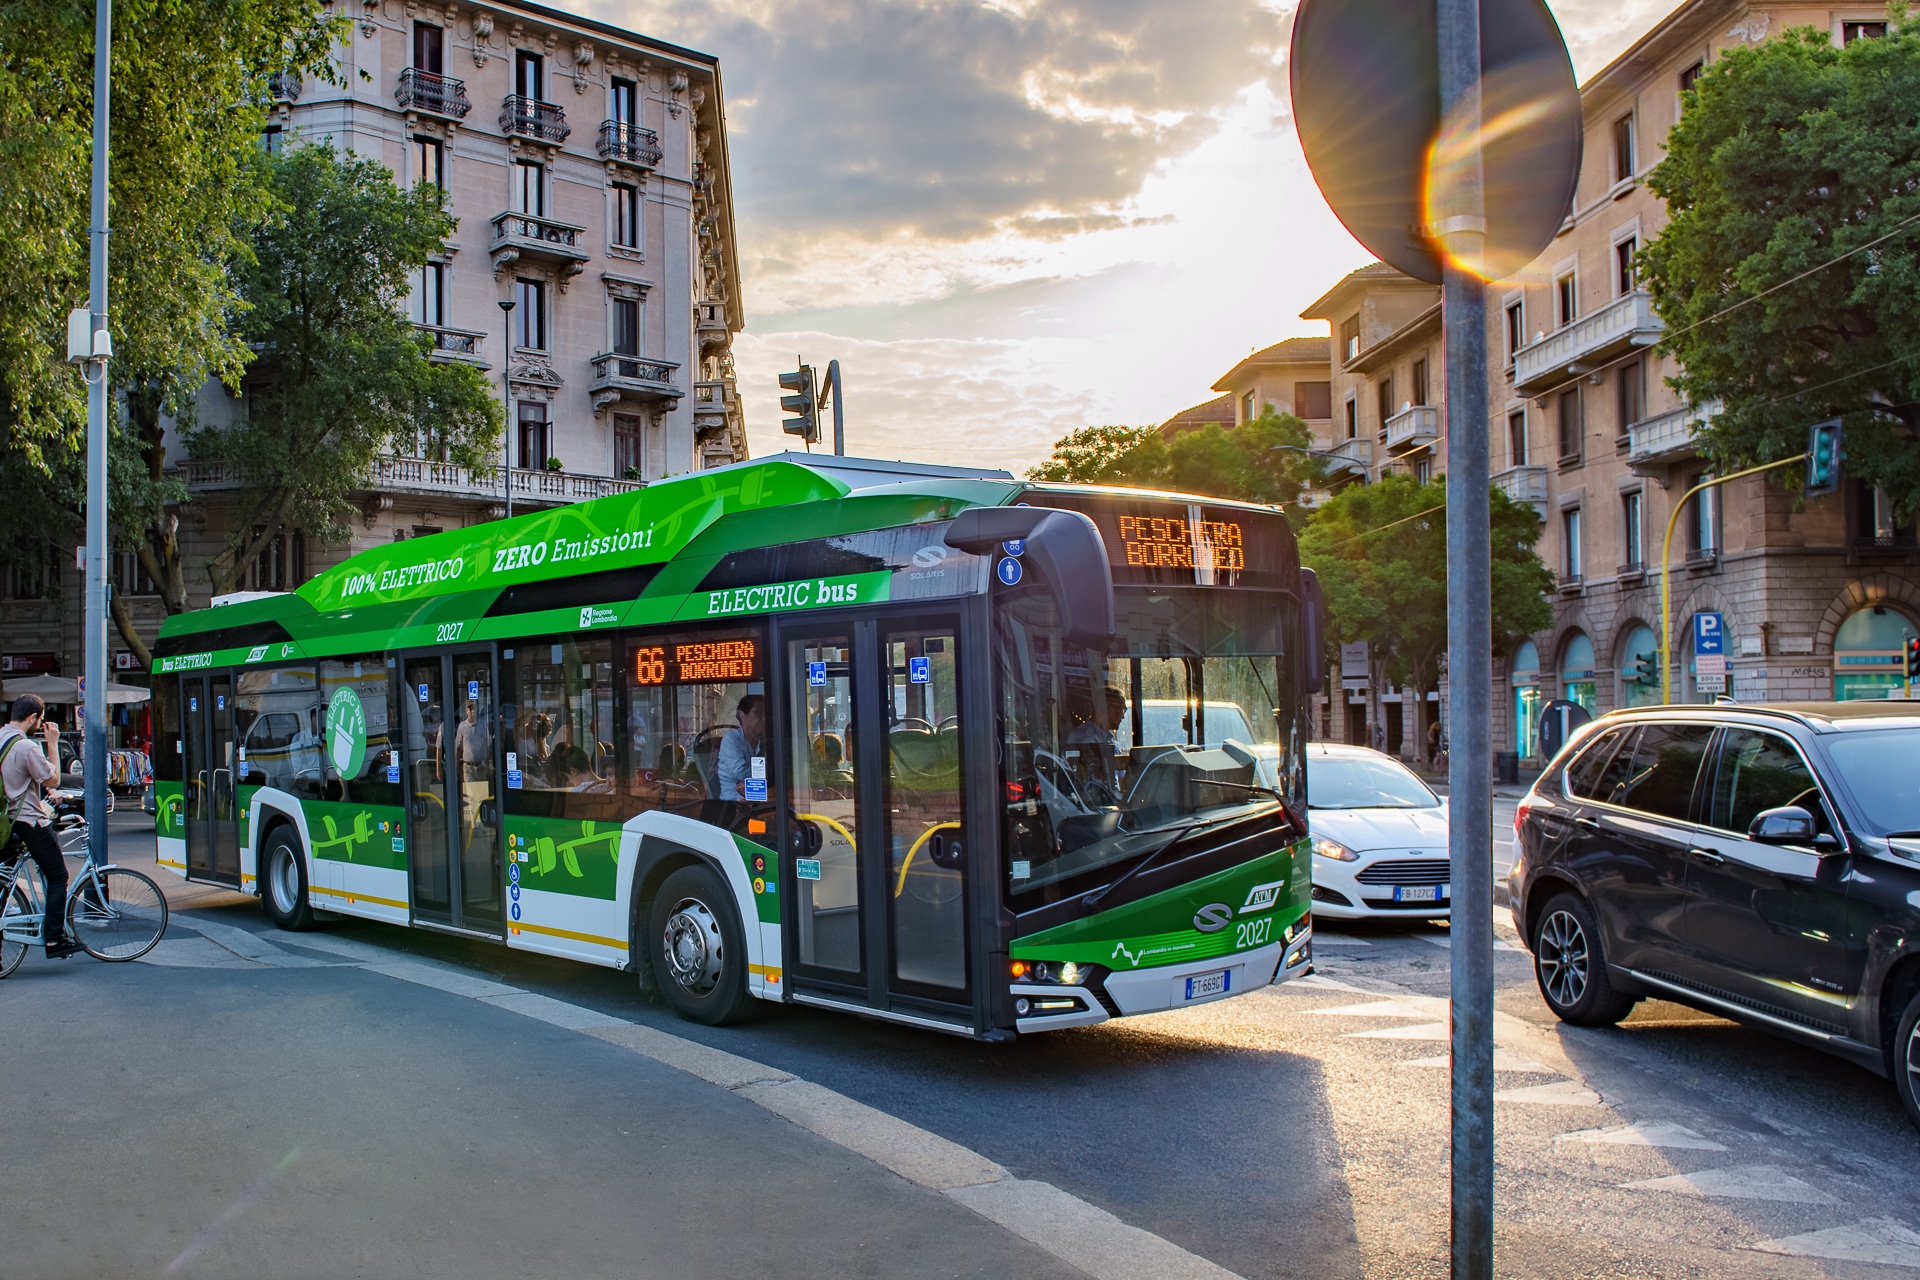 More orders from Milan – 75 electric Solaris buses will make their way to Italy